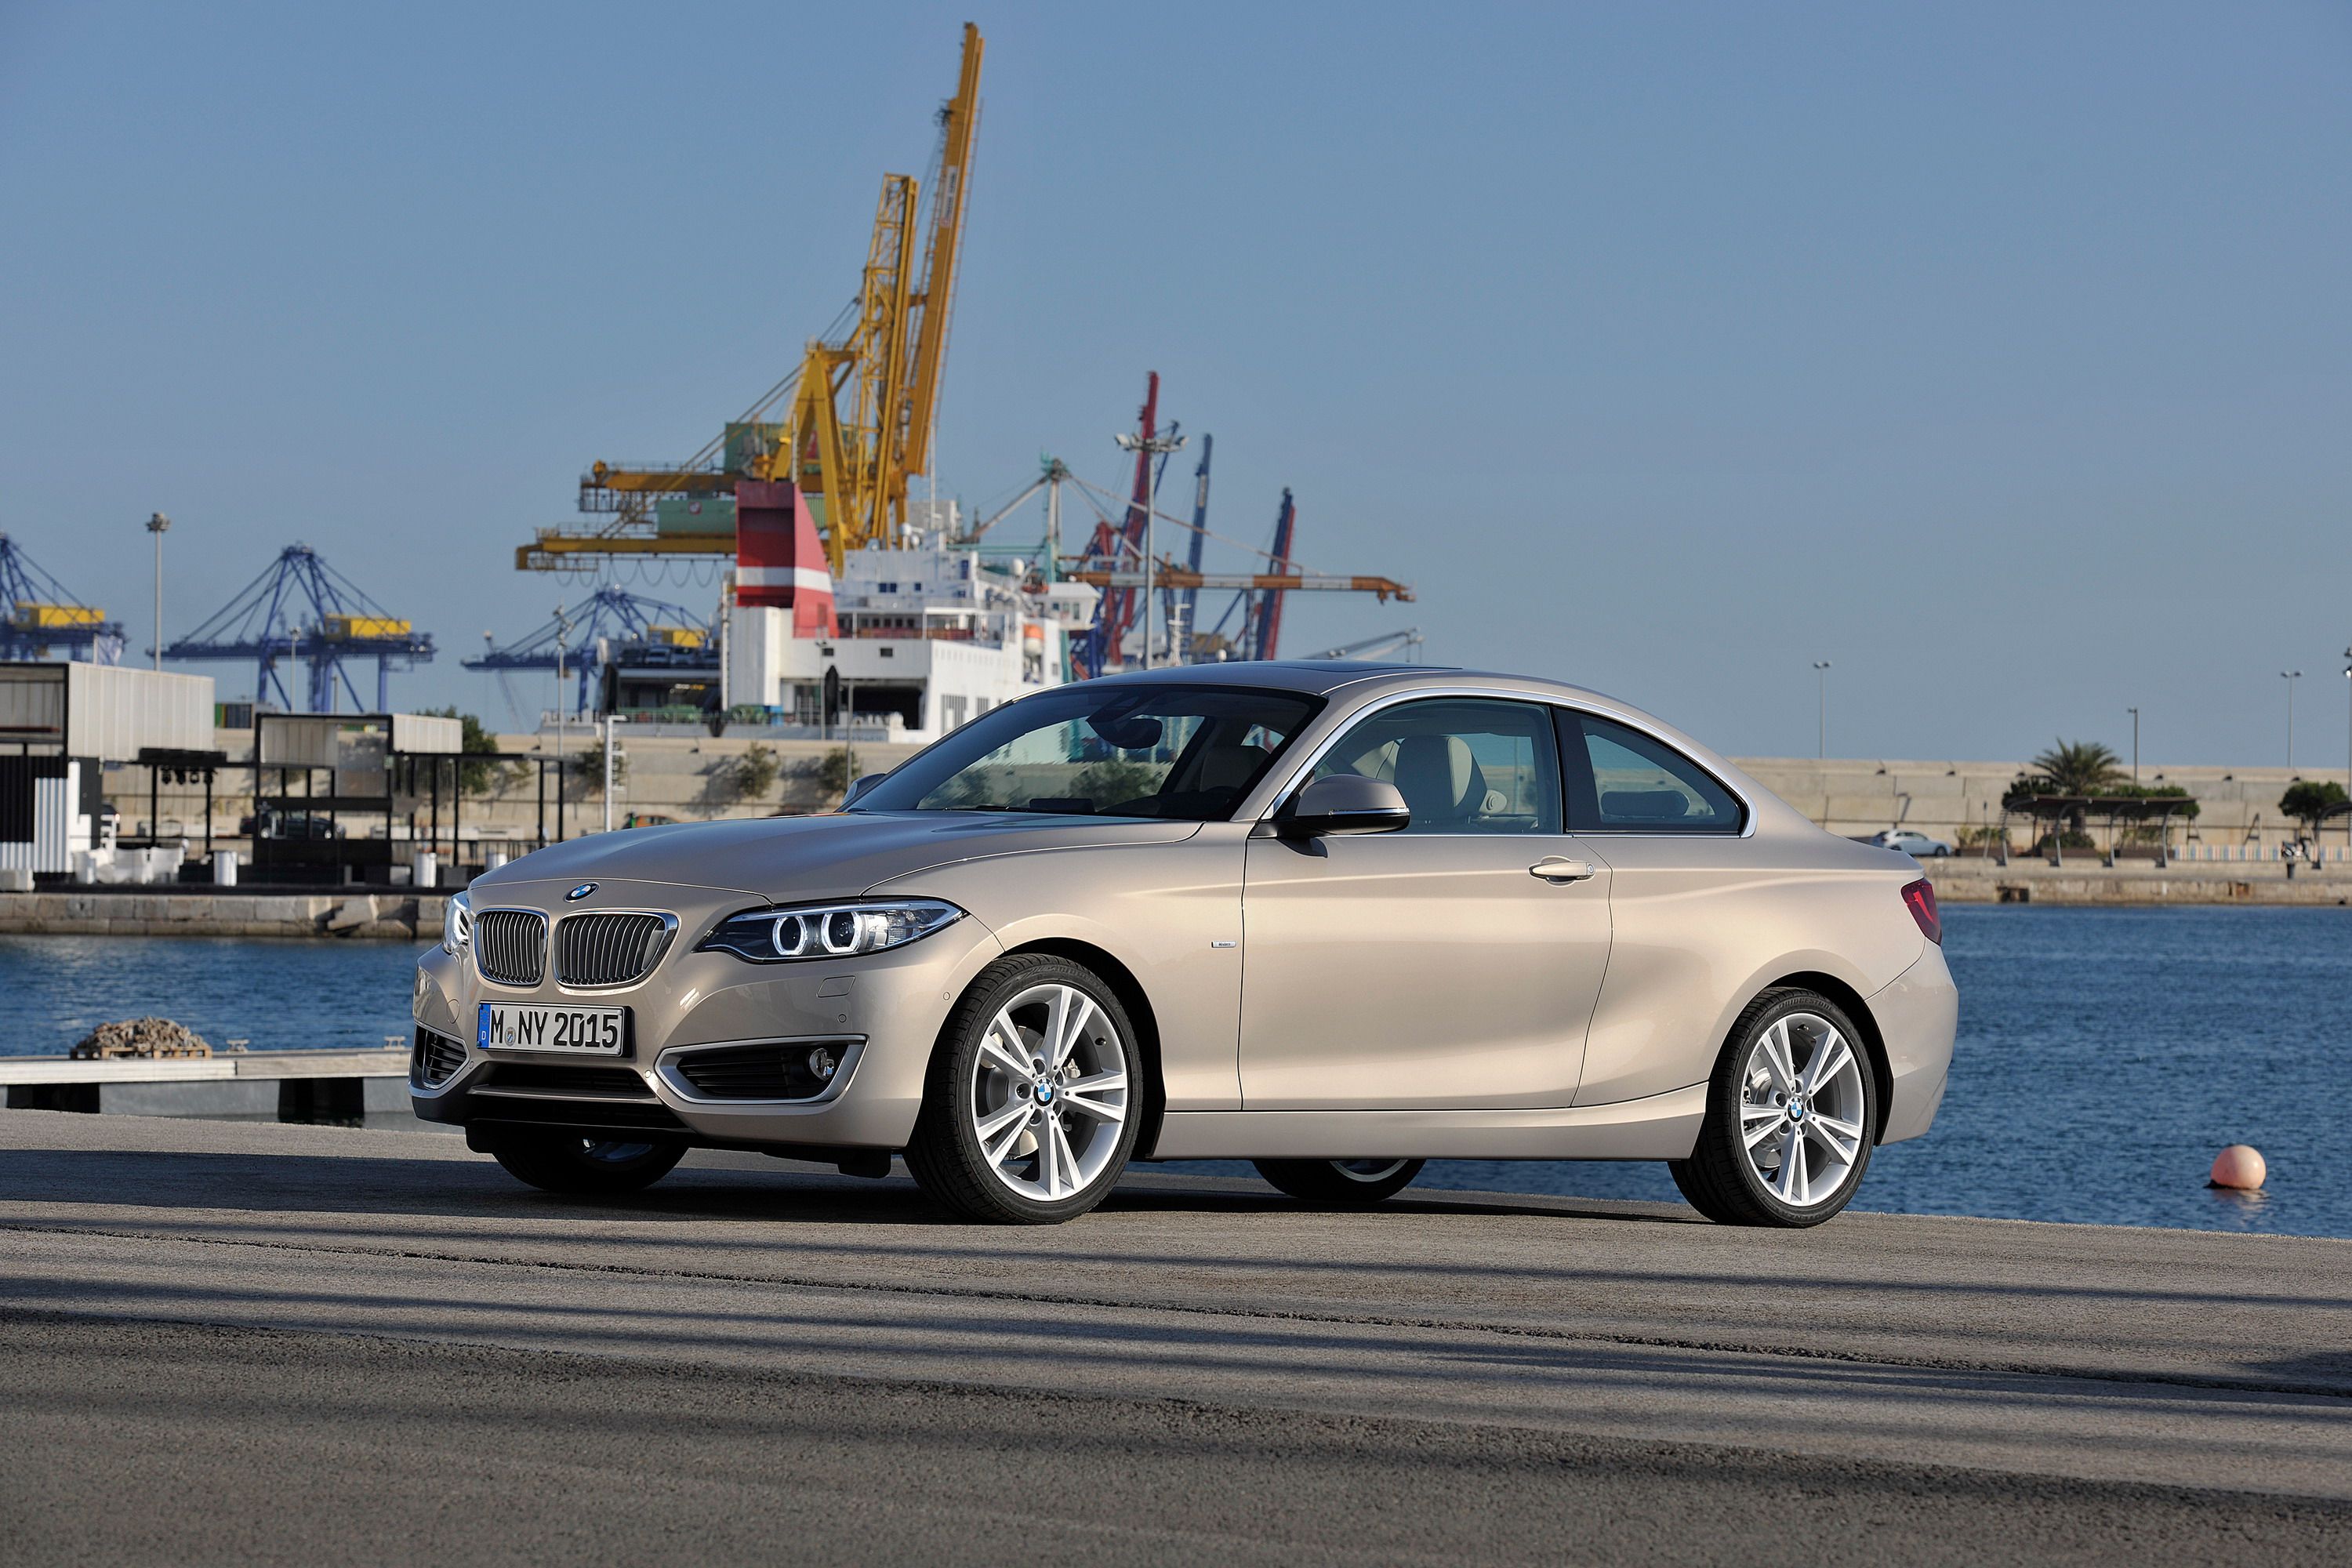 2014 - 2015 BMW 2 Series Coupe